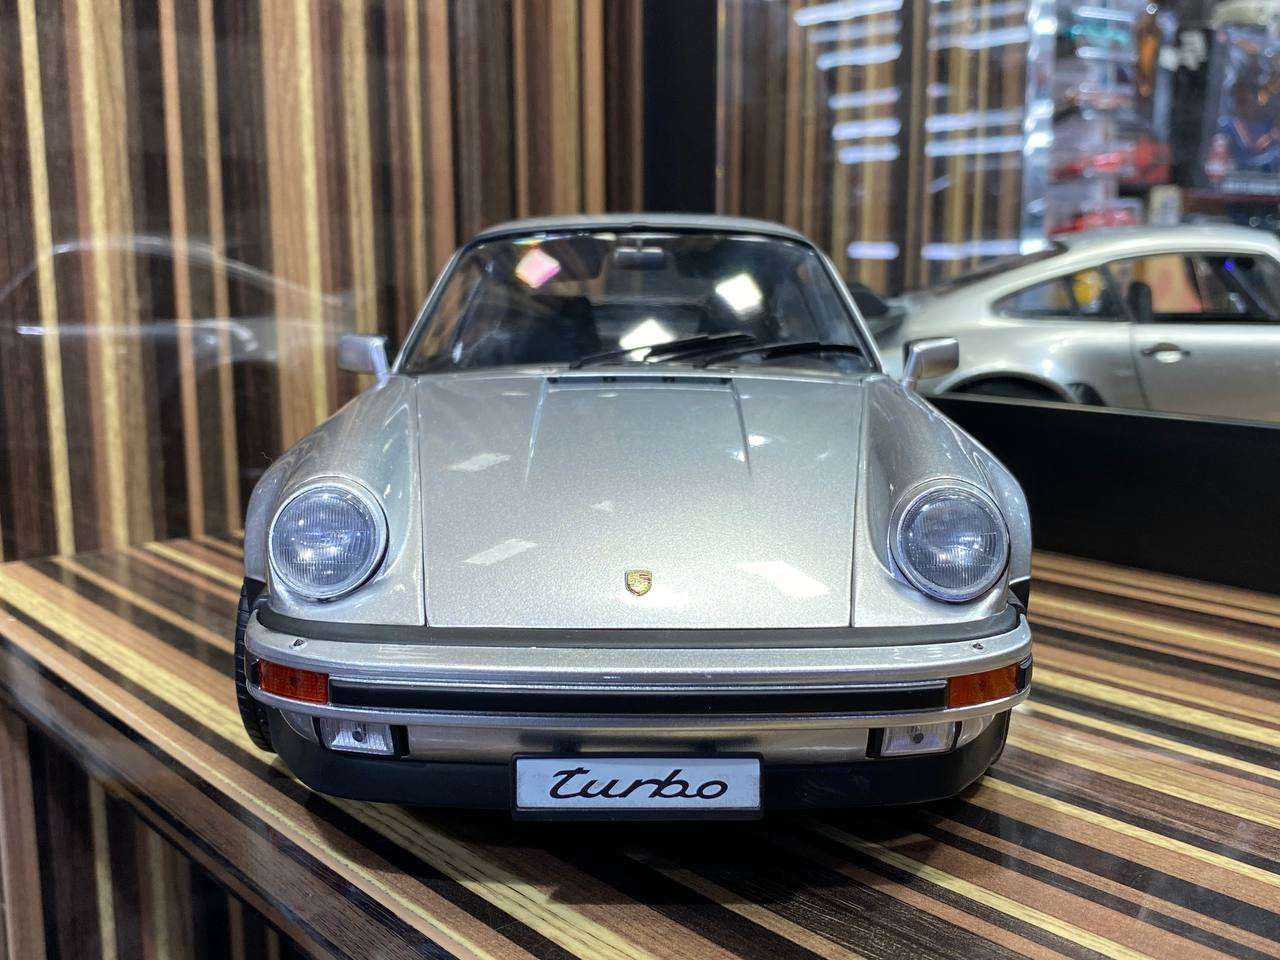 1/12 Schuco Metal Diecast - Porsche Turbo 930 in Timeless Silver with Full Opening|Sold in Dturman.com Dubai UAE.